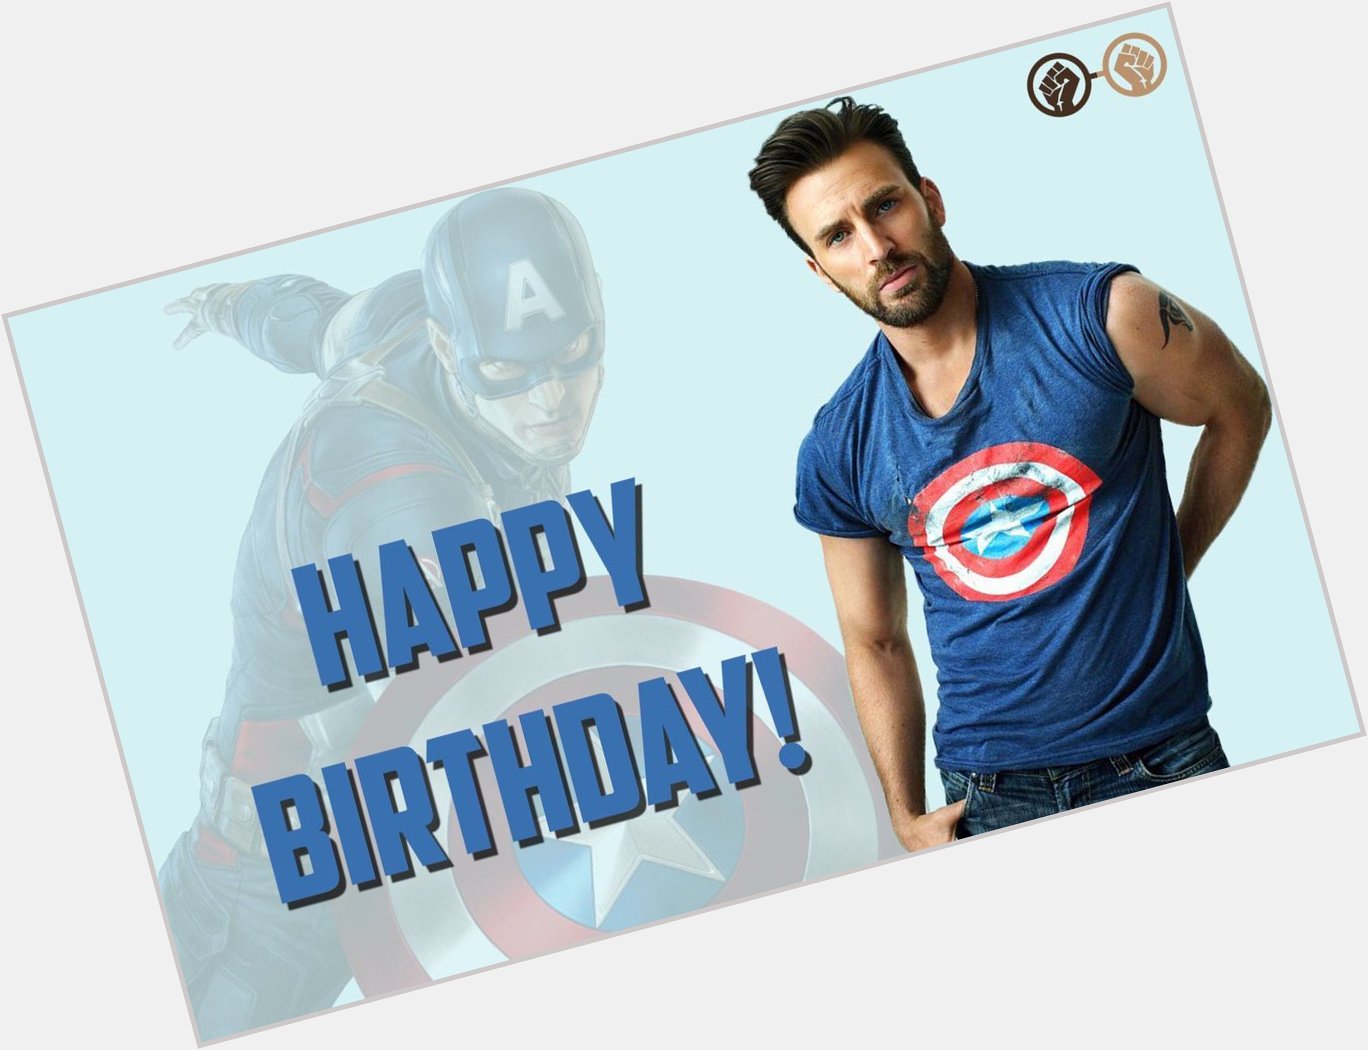 Happy birthday to Captain America himself, Chris Evans! The talented star turns 37 today. We wish him all the best! 